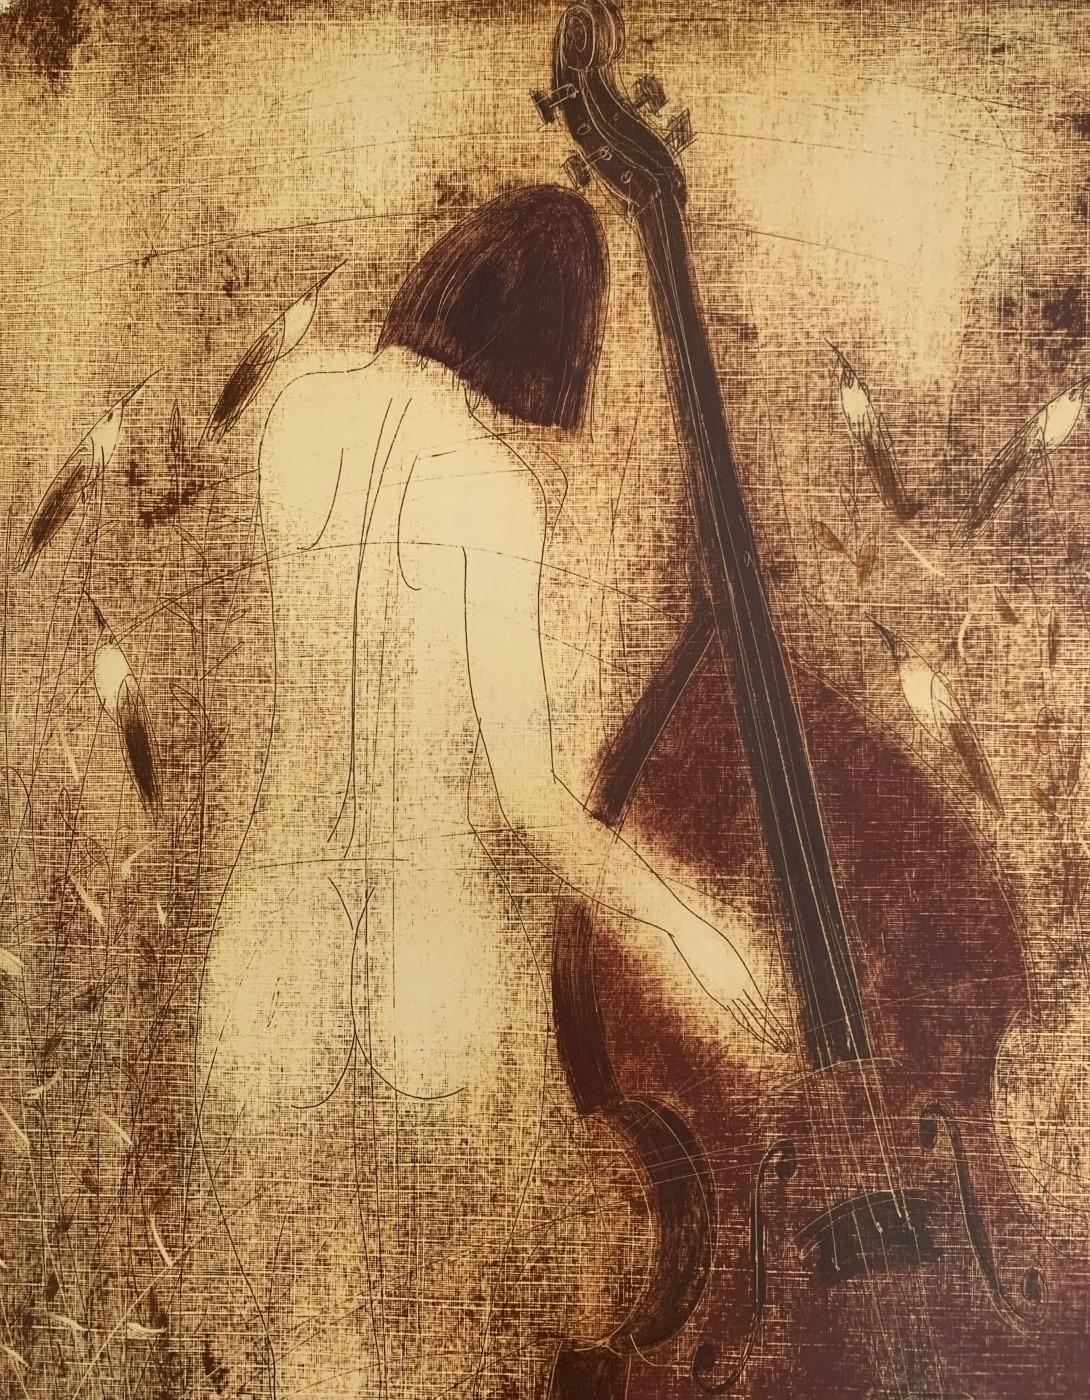 Contemporary figurative nude monotype print by Belarussian artist, Siergiej Timochow. Print depicts a woman playing on a double bass. The composition is monochromatic. The paper/cardboard is textured. 

Siergiej Timochow (b. in 1960)
He studied at